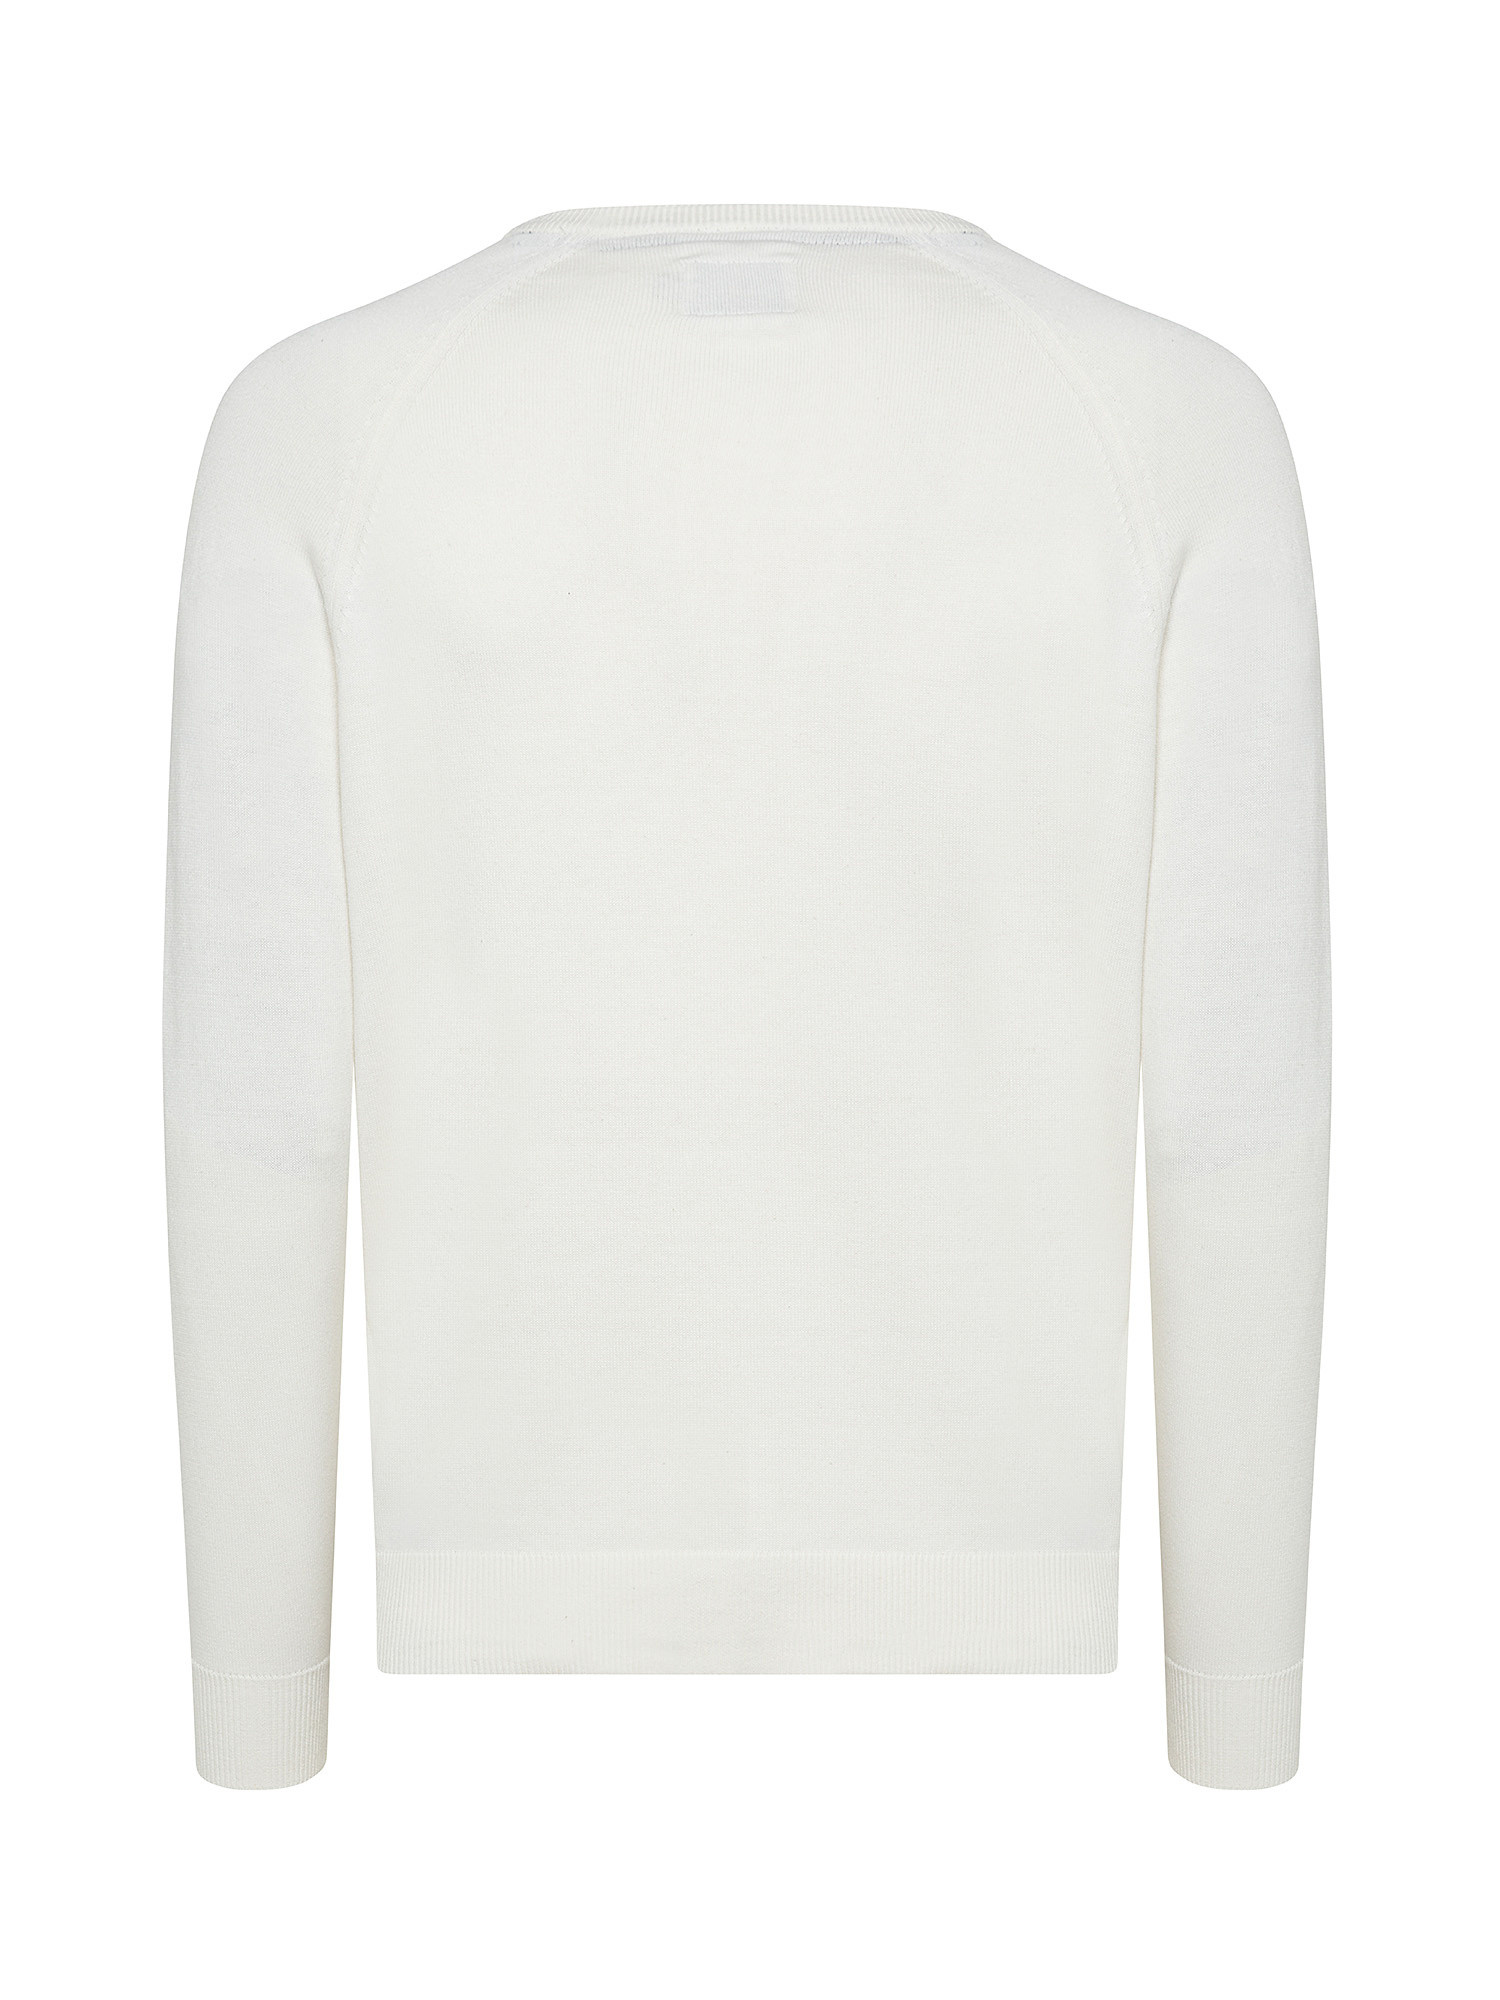 Pepe Jeans - Pullover girocollo in cotone, Bianco avorio, large image number 1